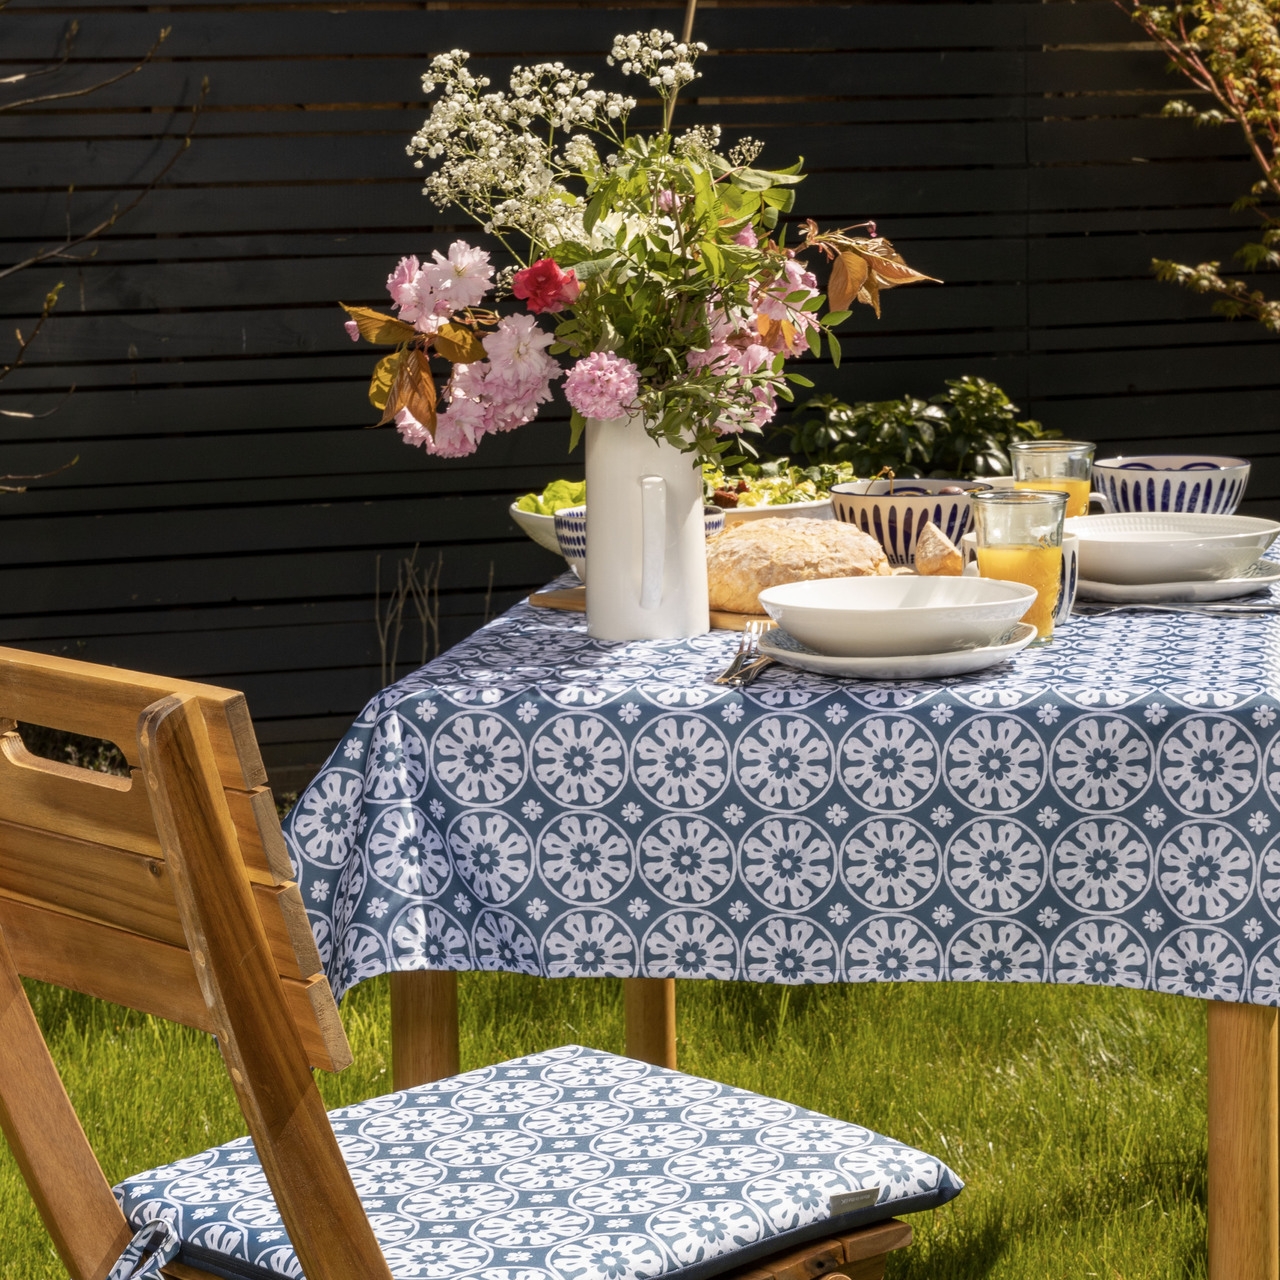 Celina Digby Luxury Outdoor Garden Tablecloth AVAILABLE IN 5 SIZES – Optional Centre Hole for Parasol Casablanca Navy XL (250cm x 140cm)